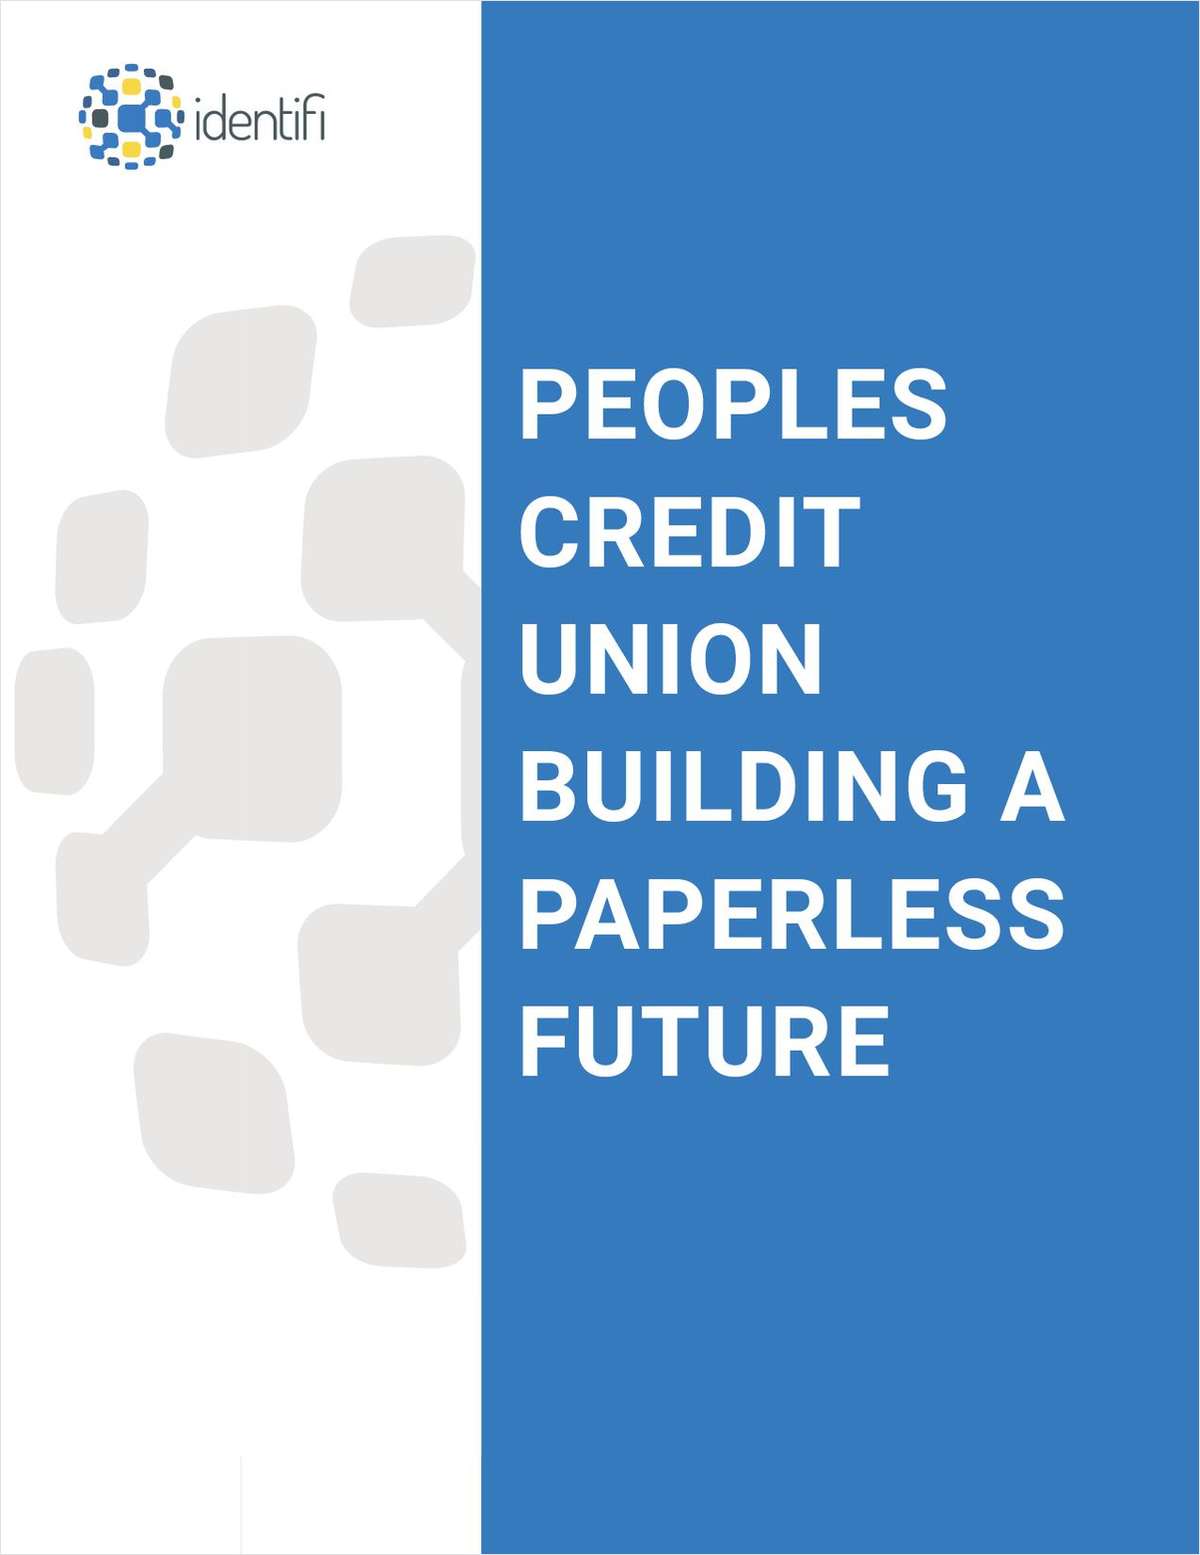 How People's Credit Union is Building a Paperless Future link